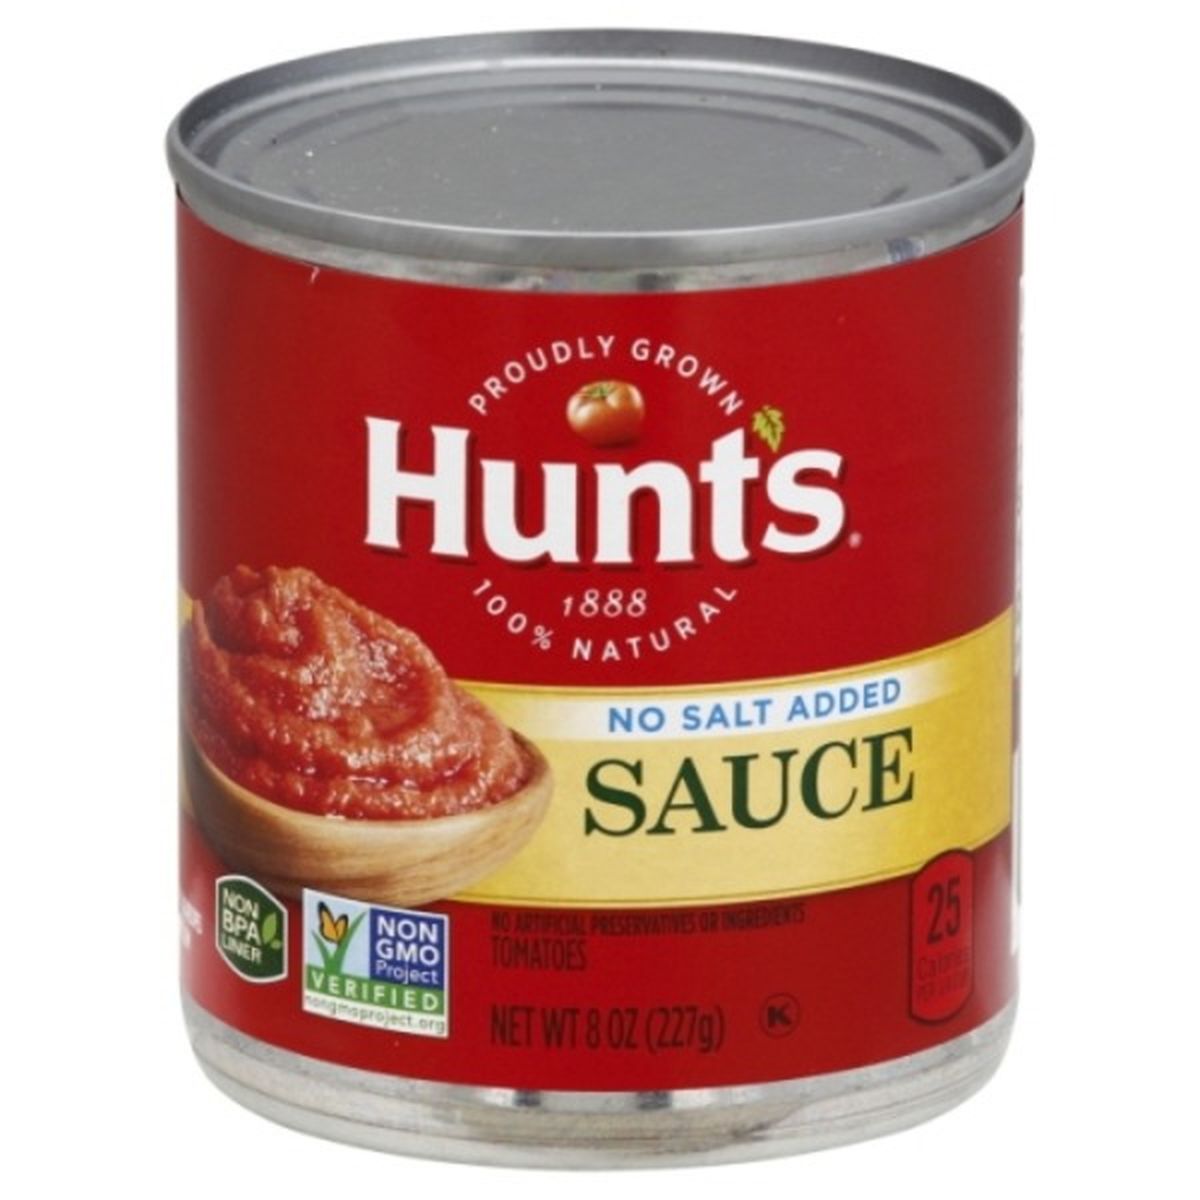 Calories in Hunt's Tomatoes, No Salt Added, Sauce